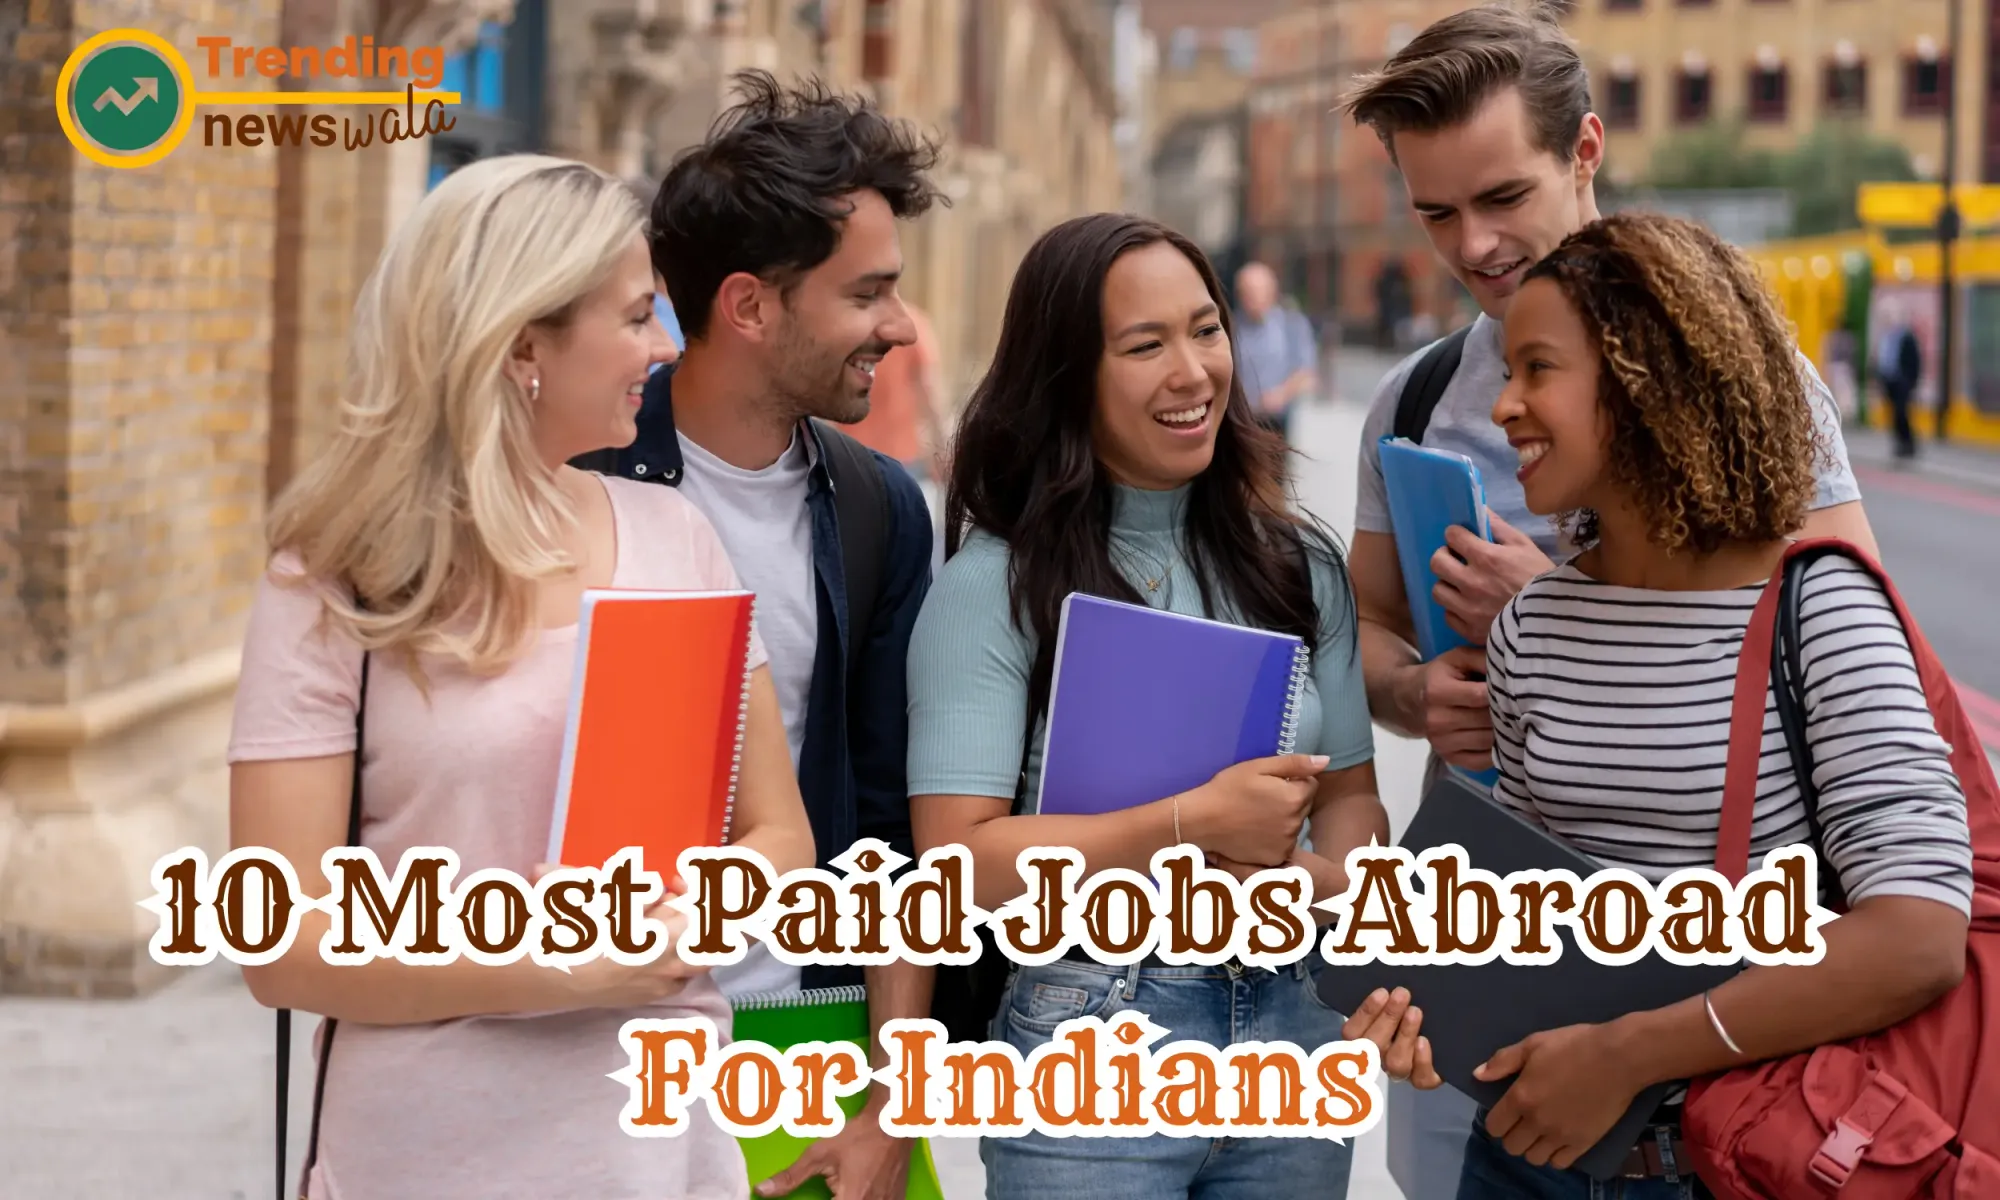 10 Most Paid Jobs Abroad For Indians